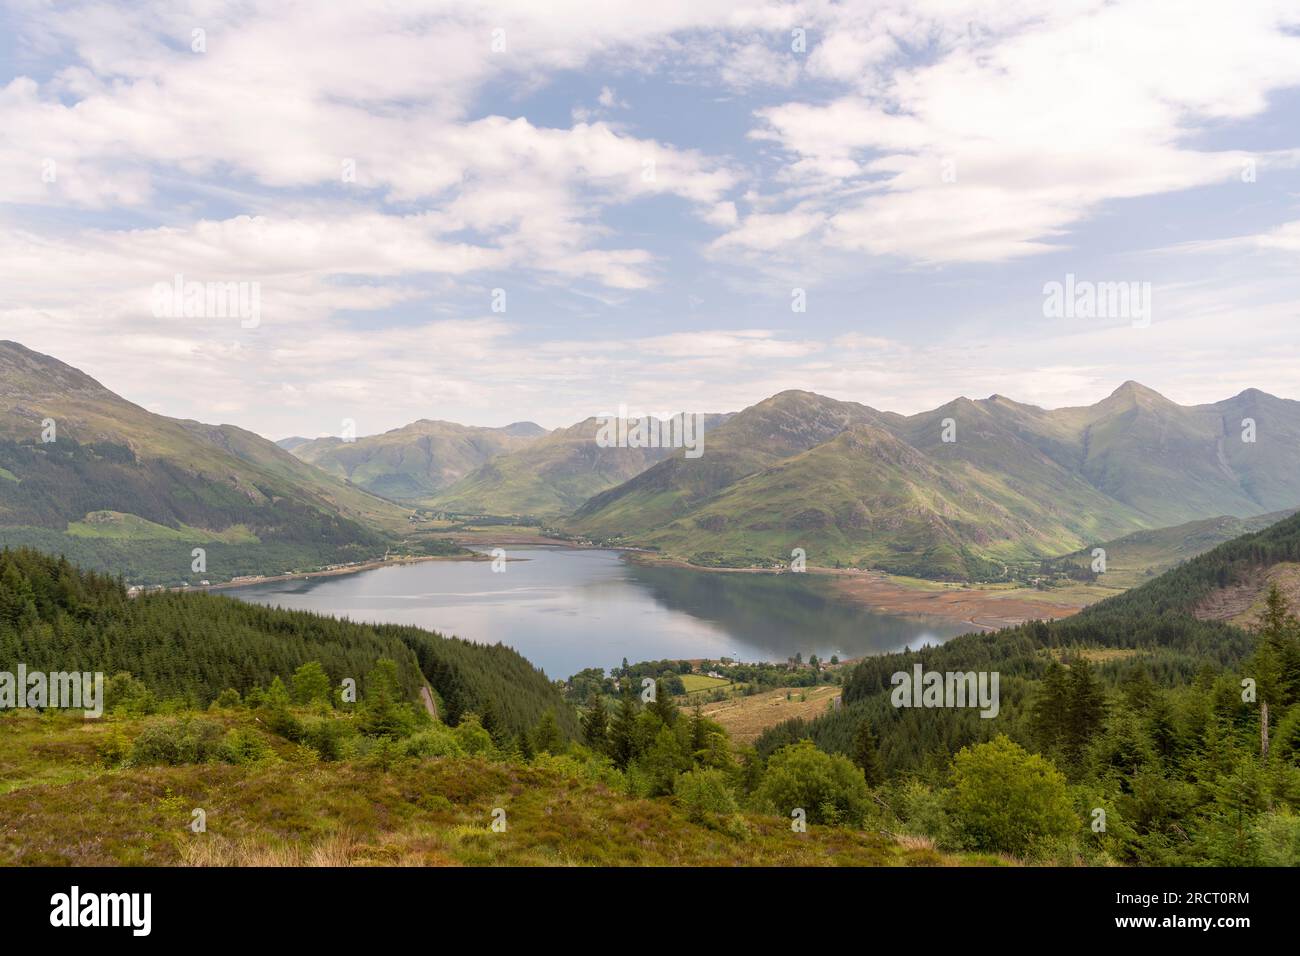 A Scenic View of Shiel Bridge, Invershiel and the Mountains Encircling the Head of Loch Duich from the Mam Ratagan Viewpoint Stock Photo